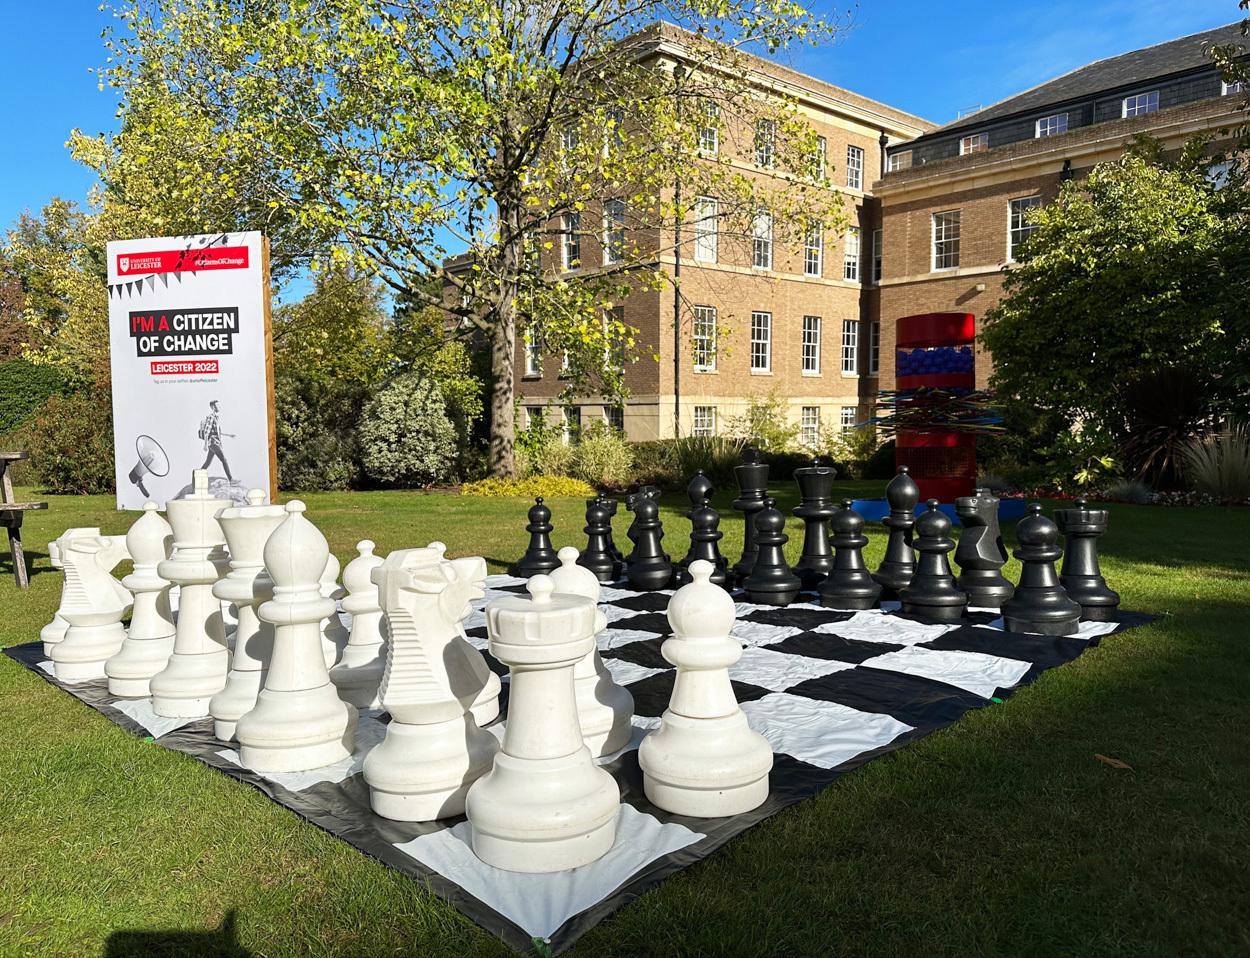 Giant Chess Hire